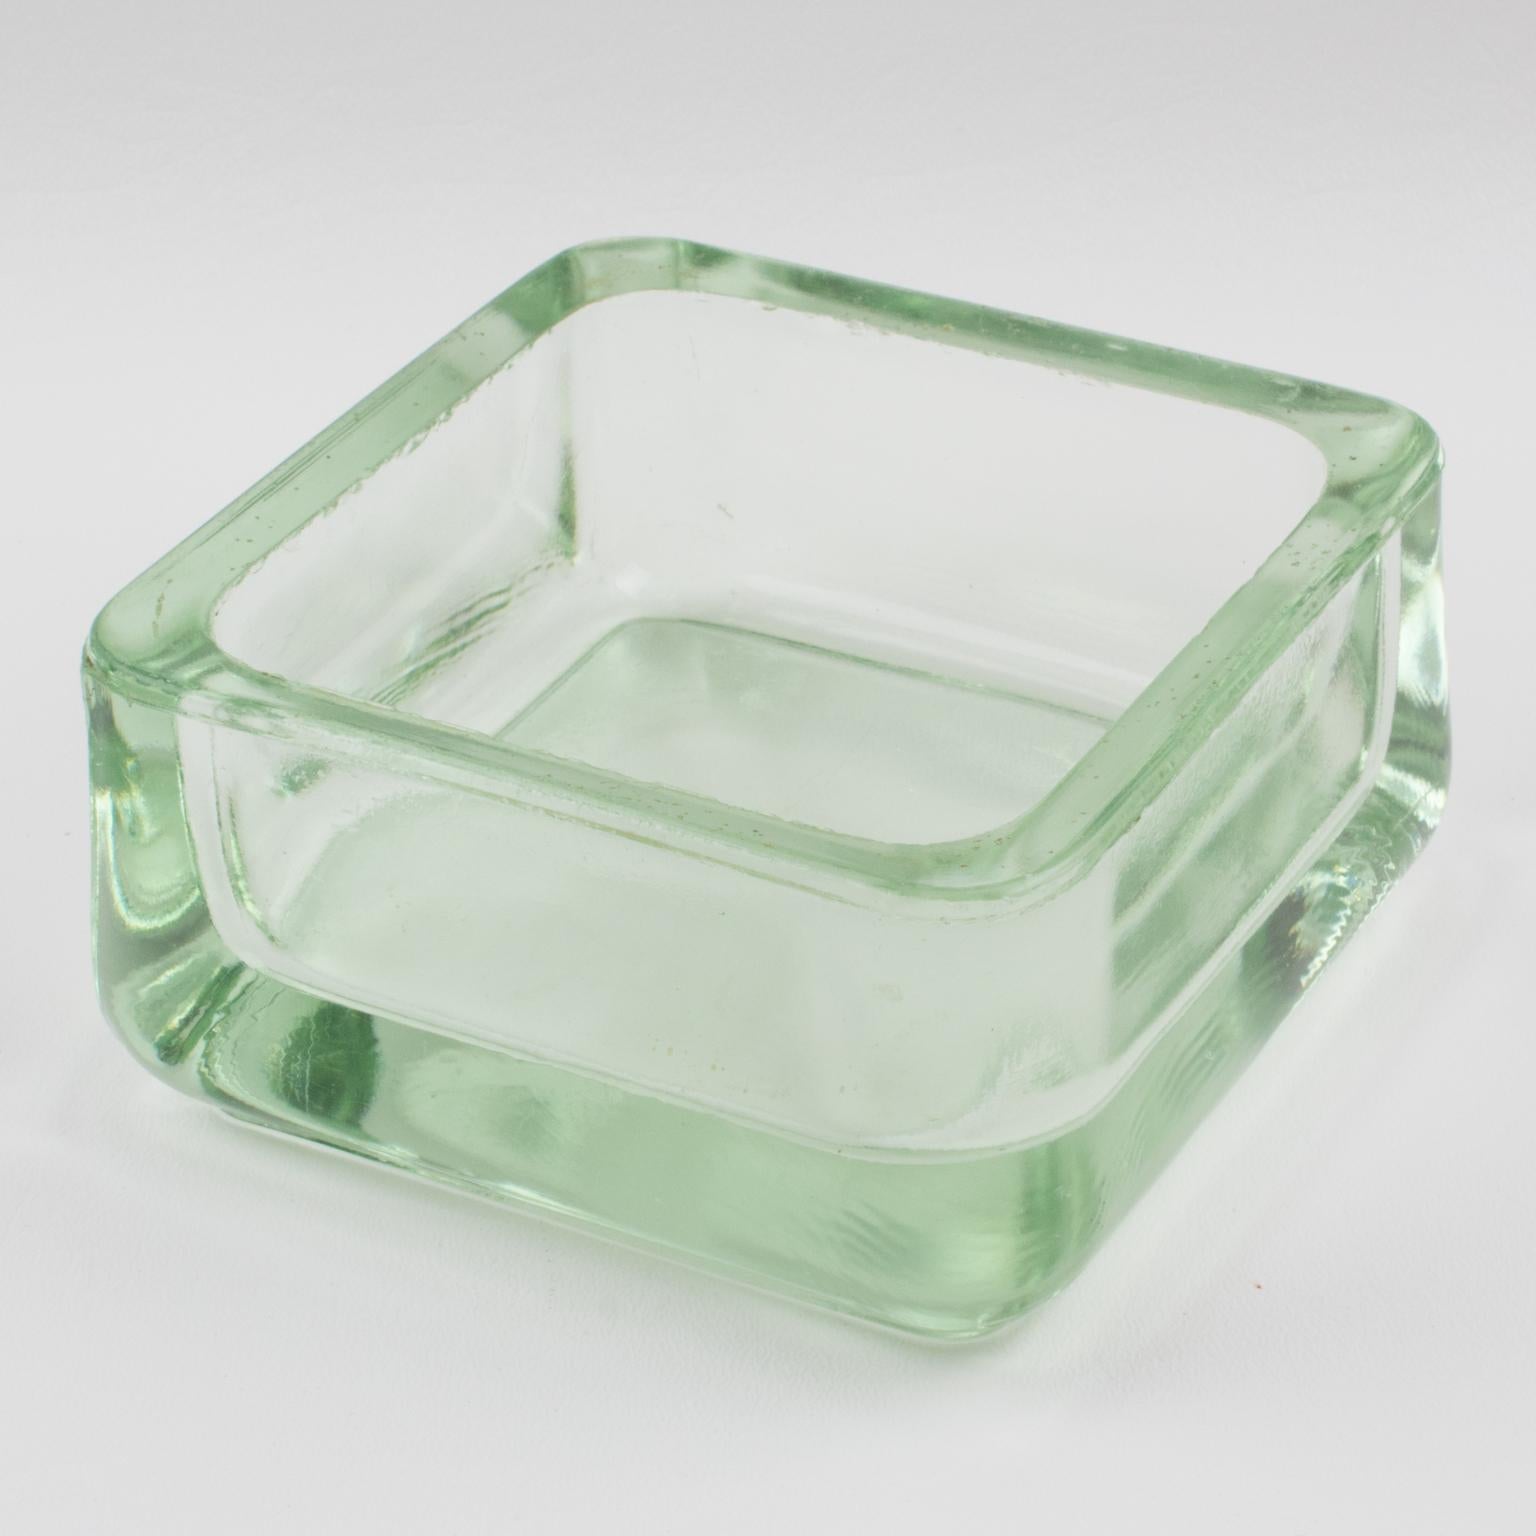 Industrial thick molded glass desktop accessory (desk tidy, ashtray or catchall) manufactured by Lumax, France. Original design by Le Corbusier.
Measurements: 4.75 in. wide (12 cm) x 4.75 in. deep (12 cm) x 2.38 in. high (6 cm).